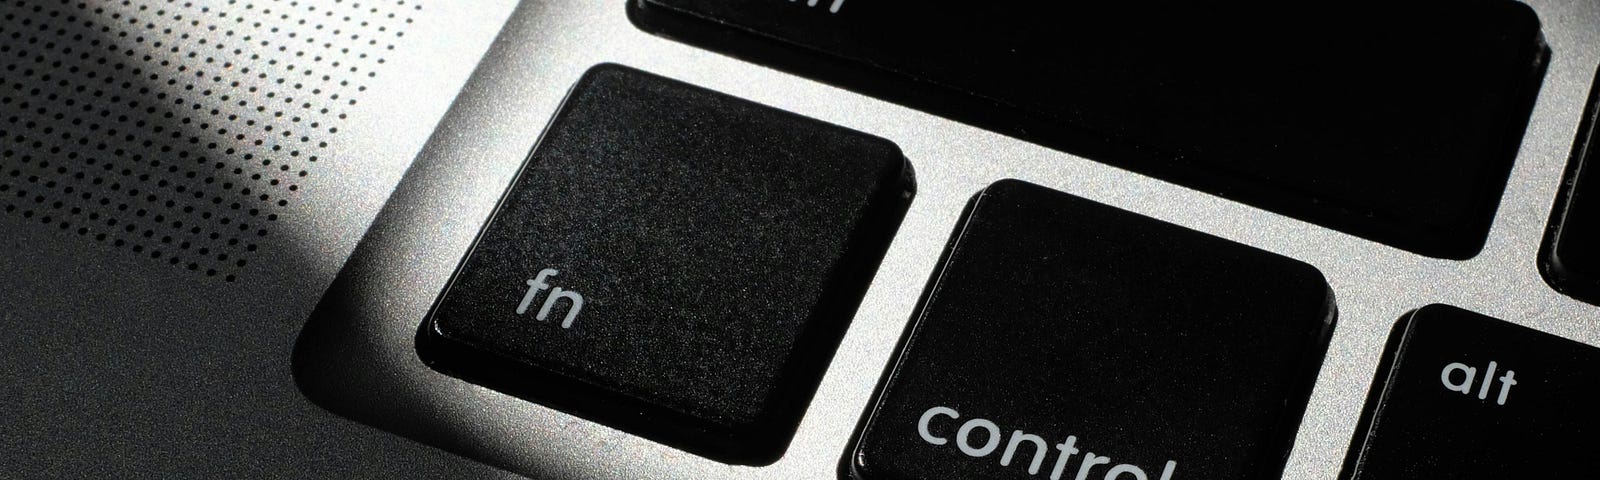 A button used for control. Who pushes yours?